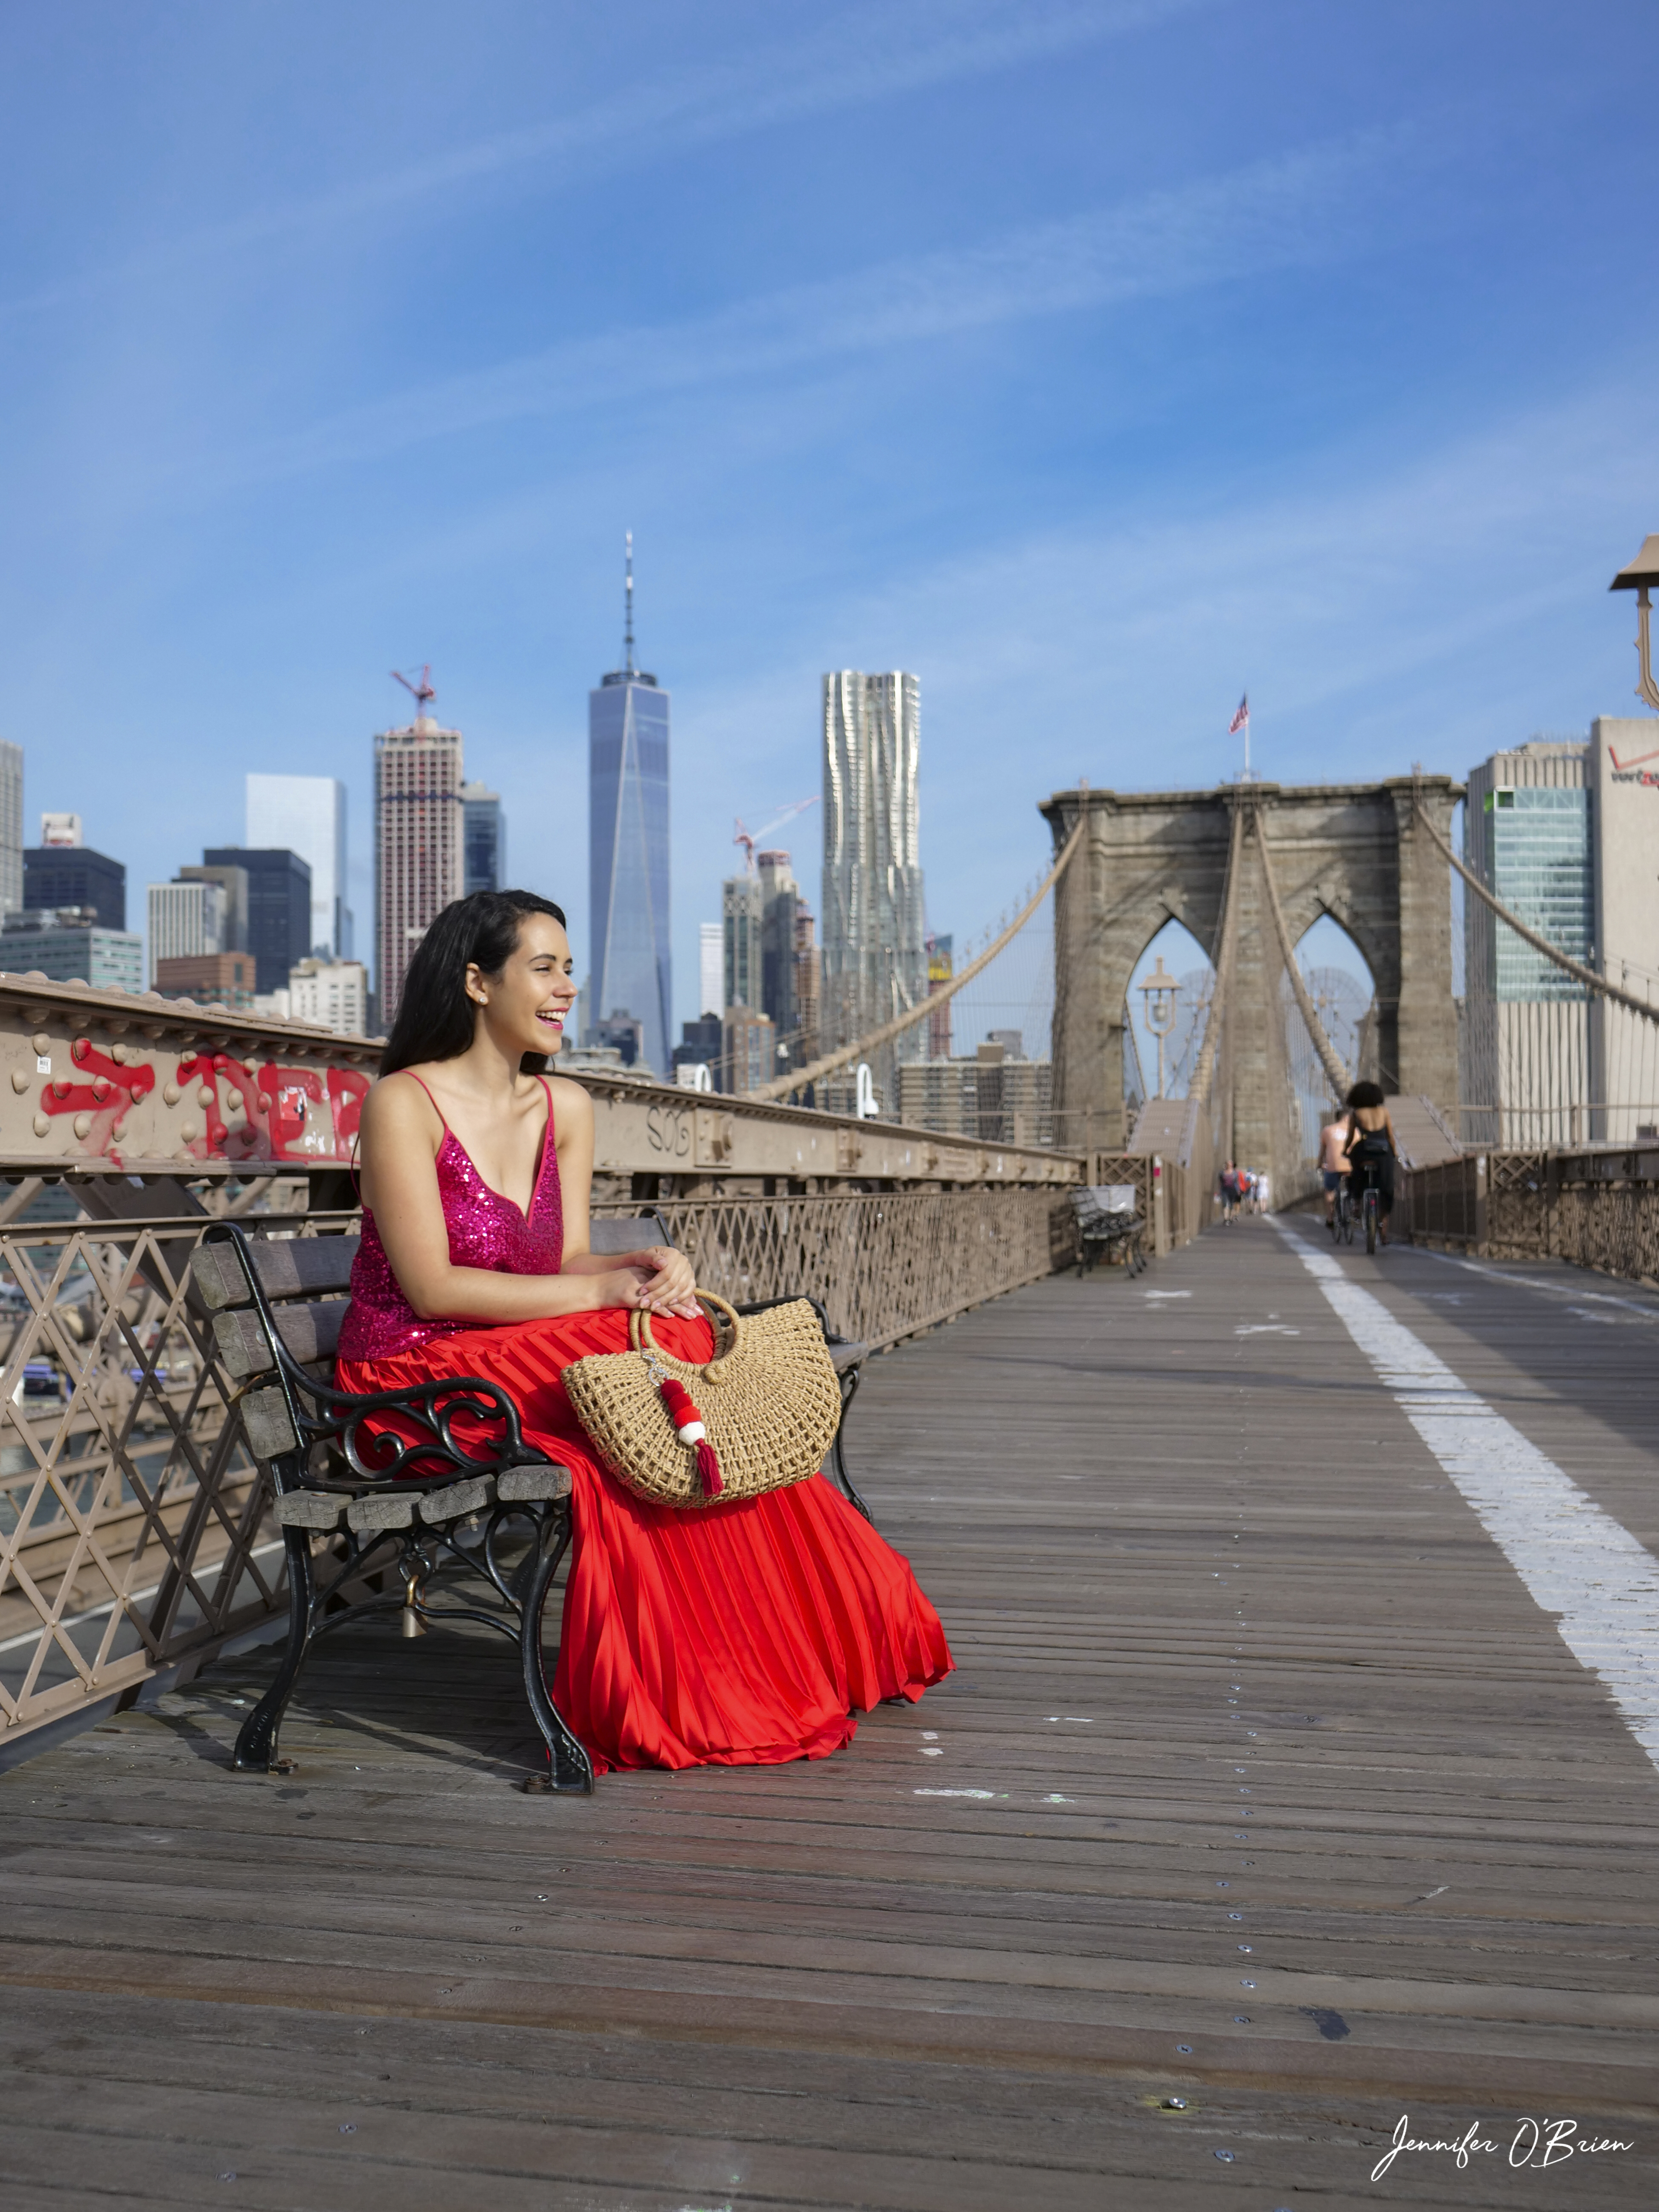 Top Instagram Photos of the Brooklyn Bridge The Travel Women Freedom Tower One World Trade Center sitting on bench red purse and dress matching 